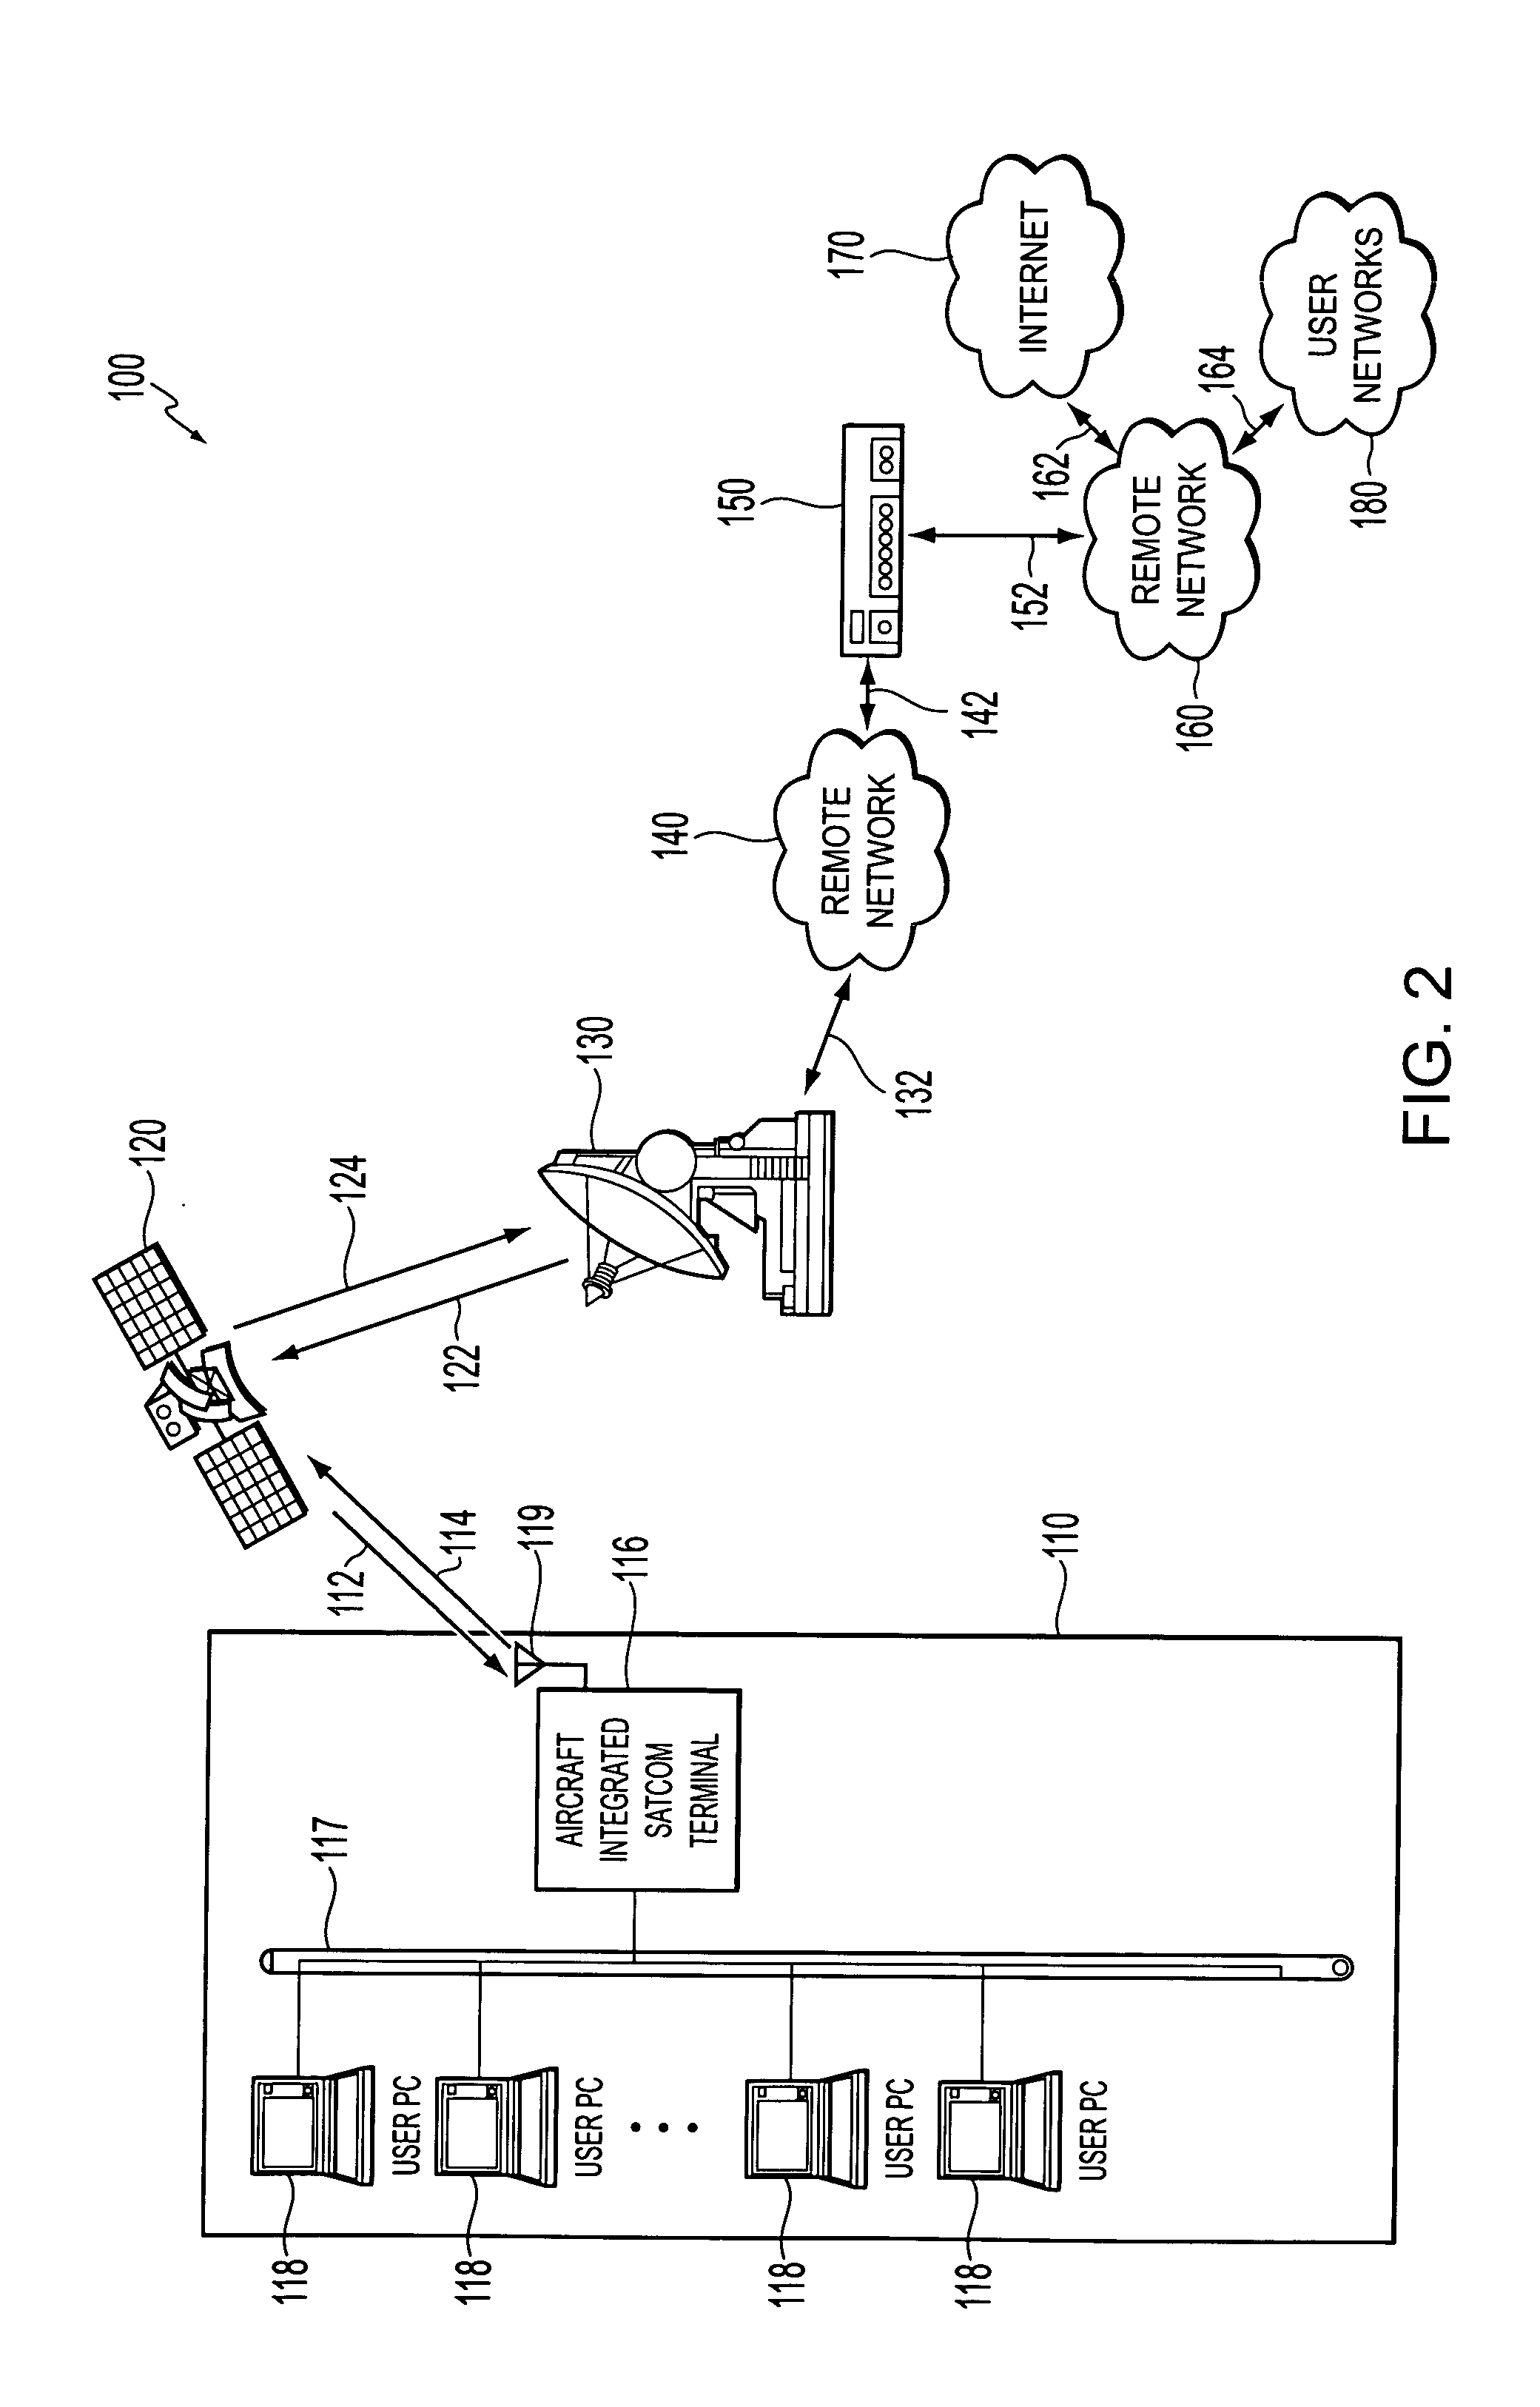 Mobile airborne high-speed broadband communications systems and methods